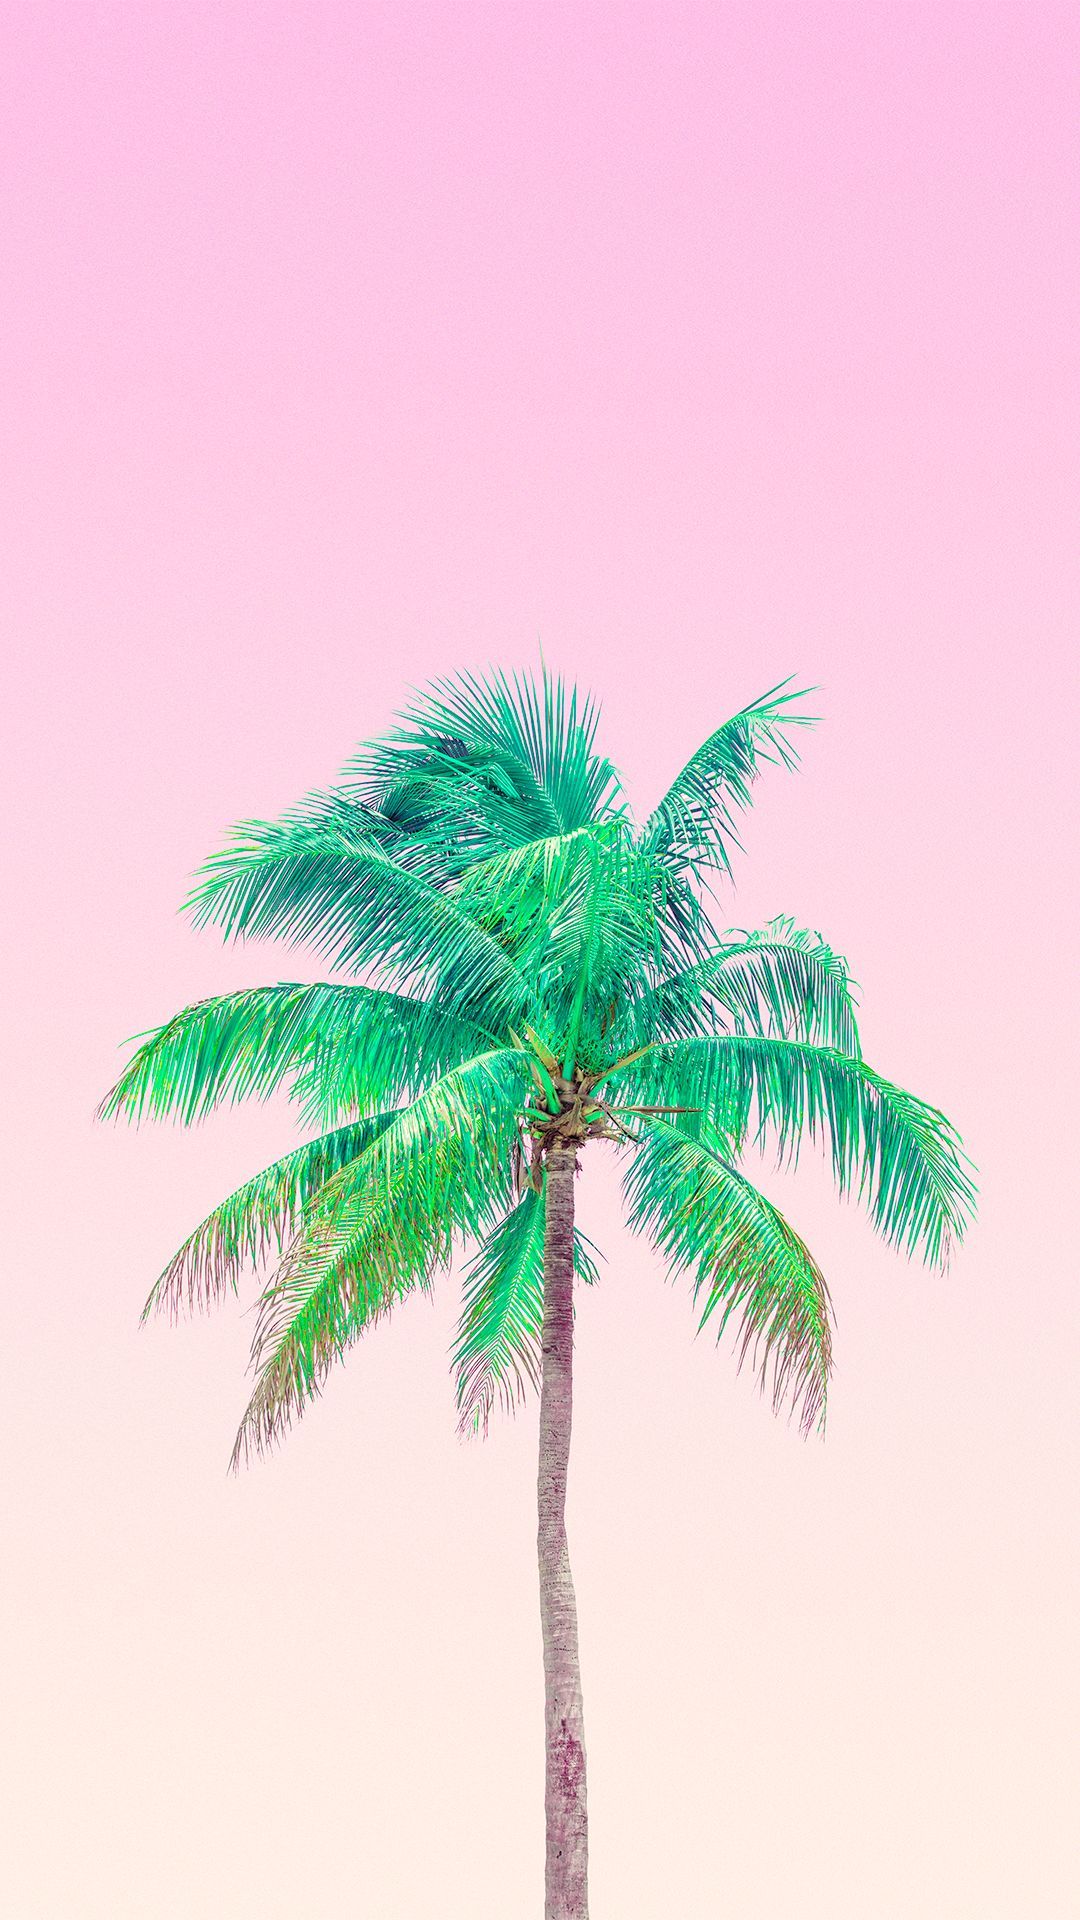 86896 Palm Trees Pink Background Images Stock Photos  Vectors   Shutterstock